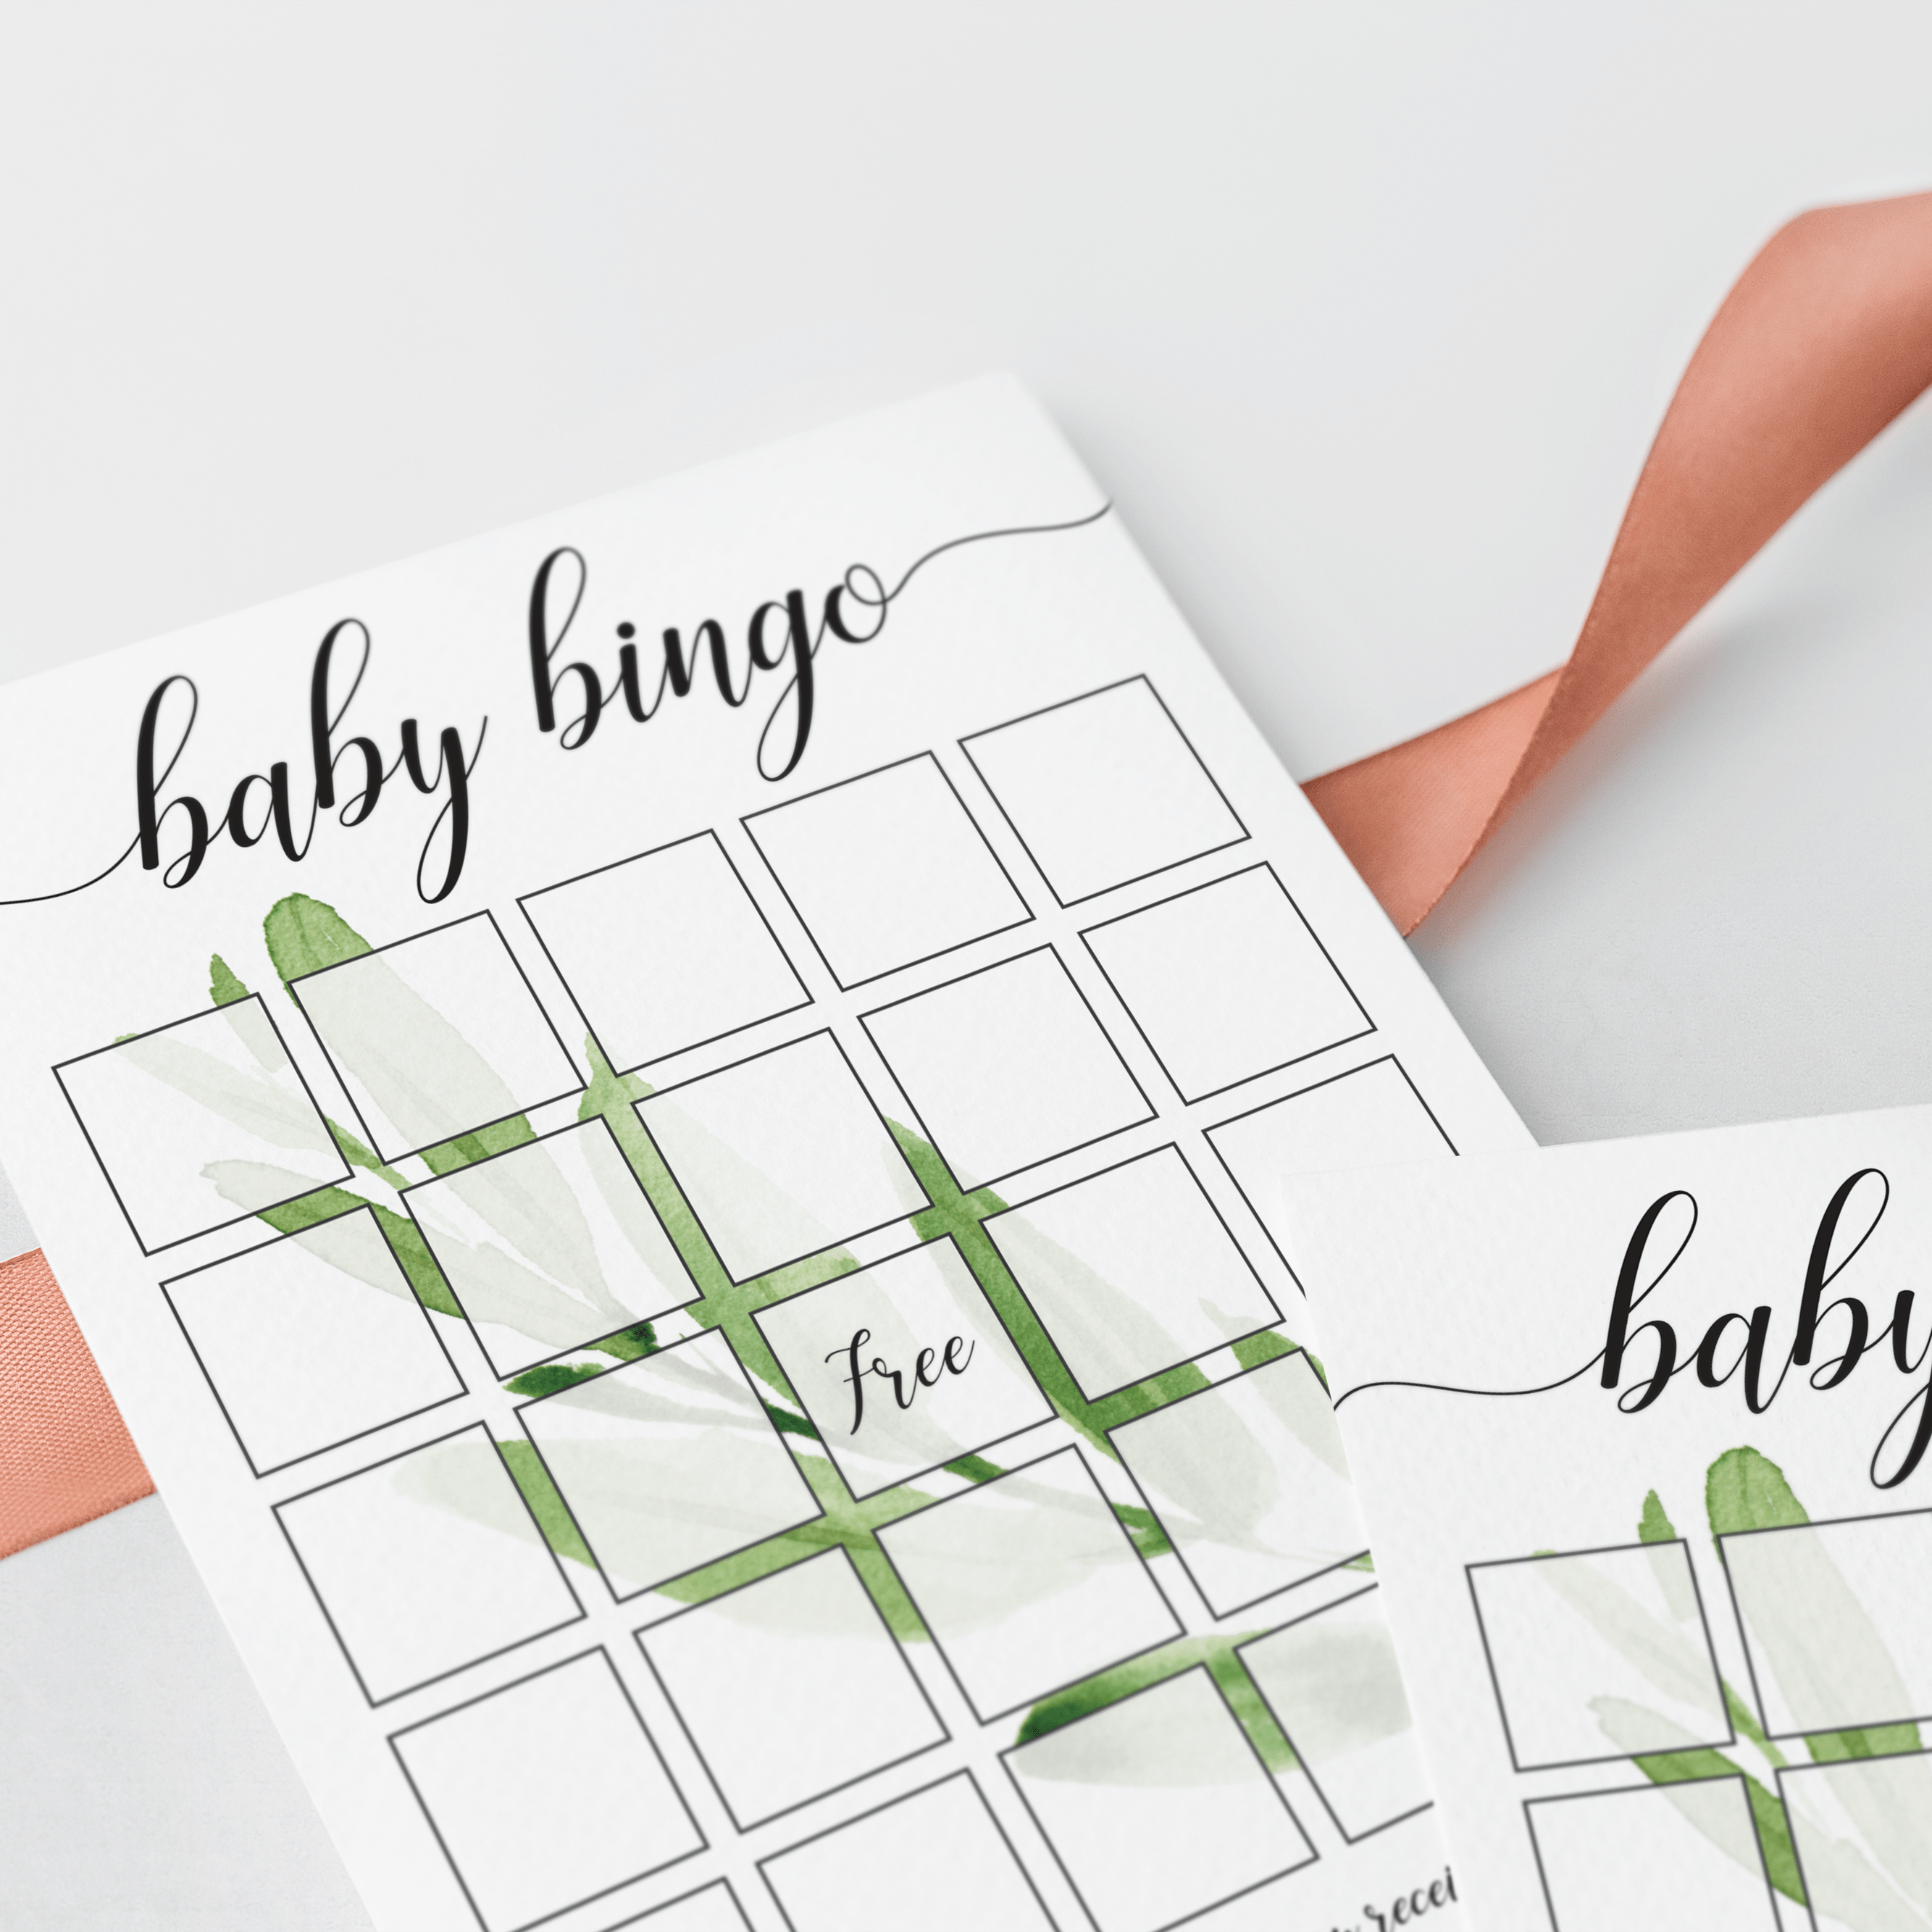 Baby bingo for gender neutral baby shower printable by LittleSizzle